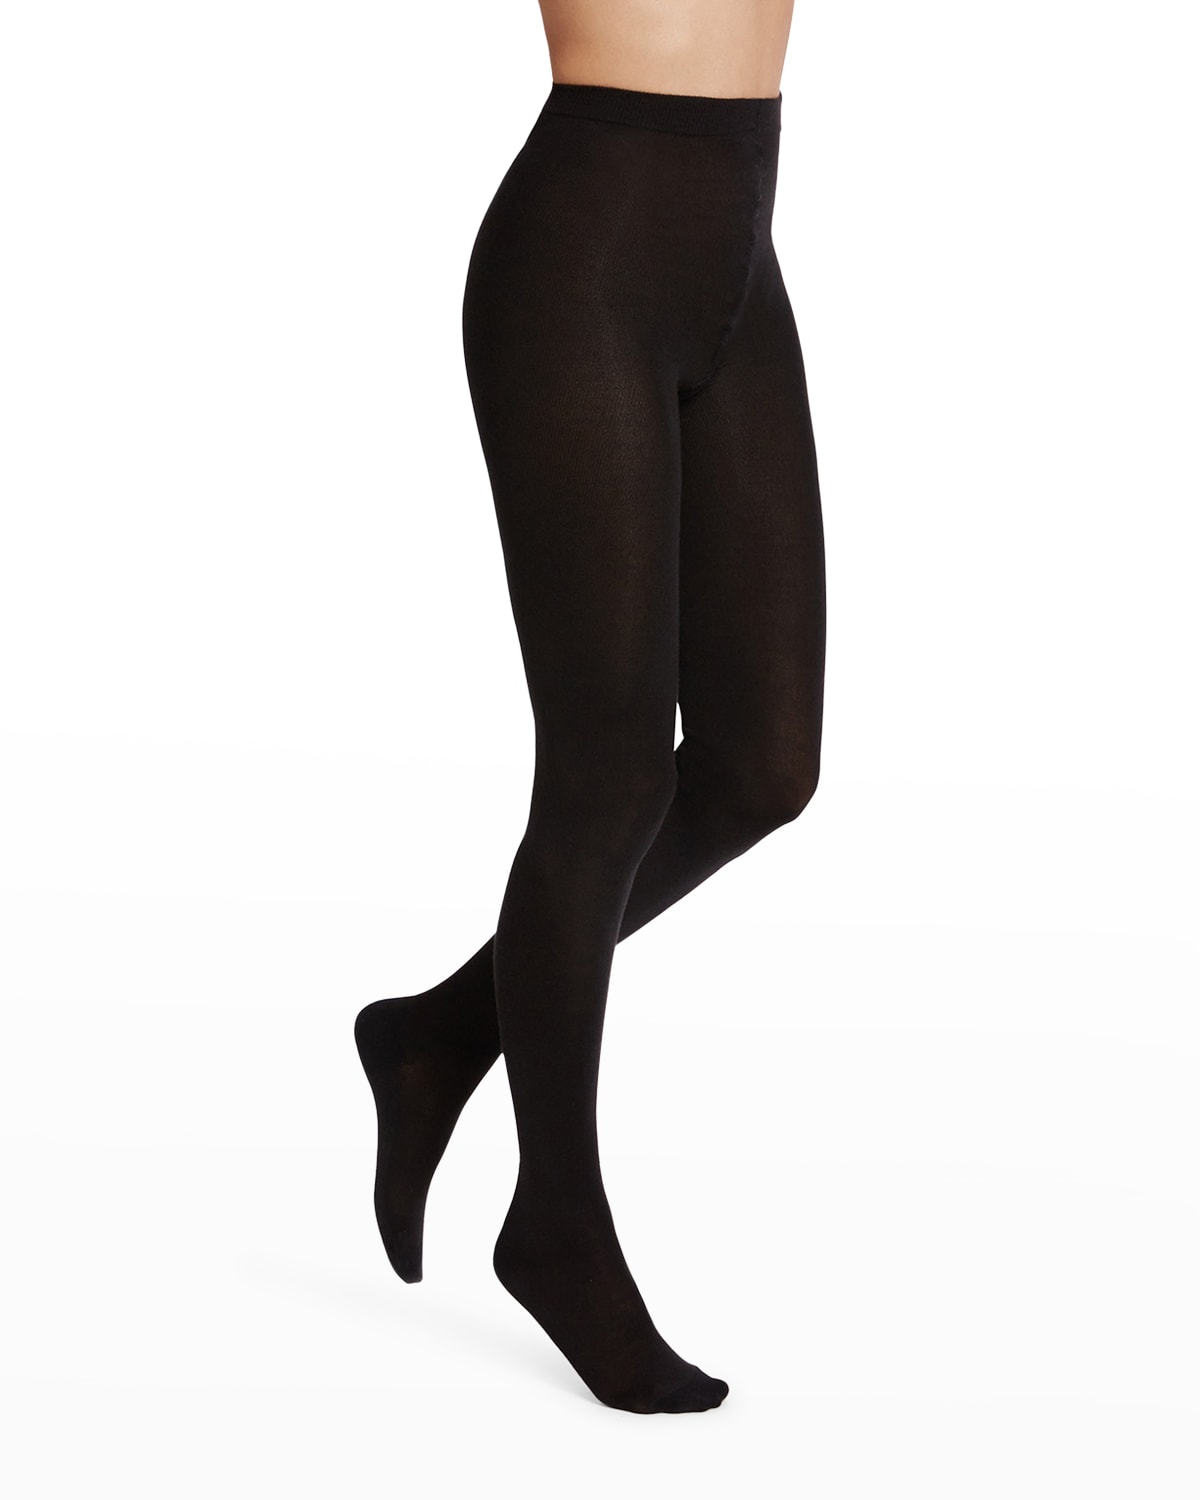 Wolford Individual 10 Soft Control Top Tights | Neiman Marcus